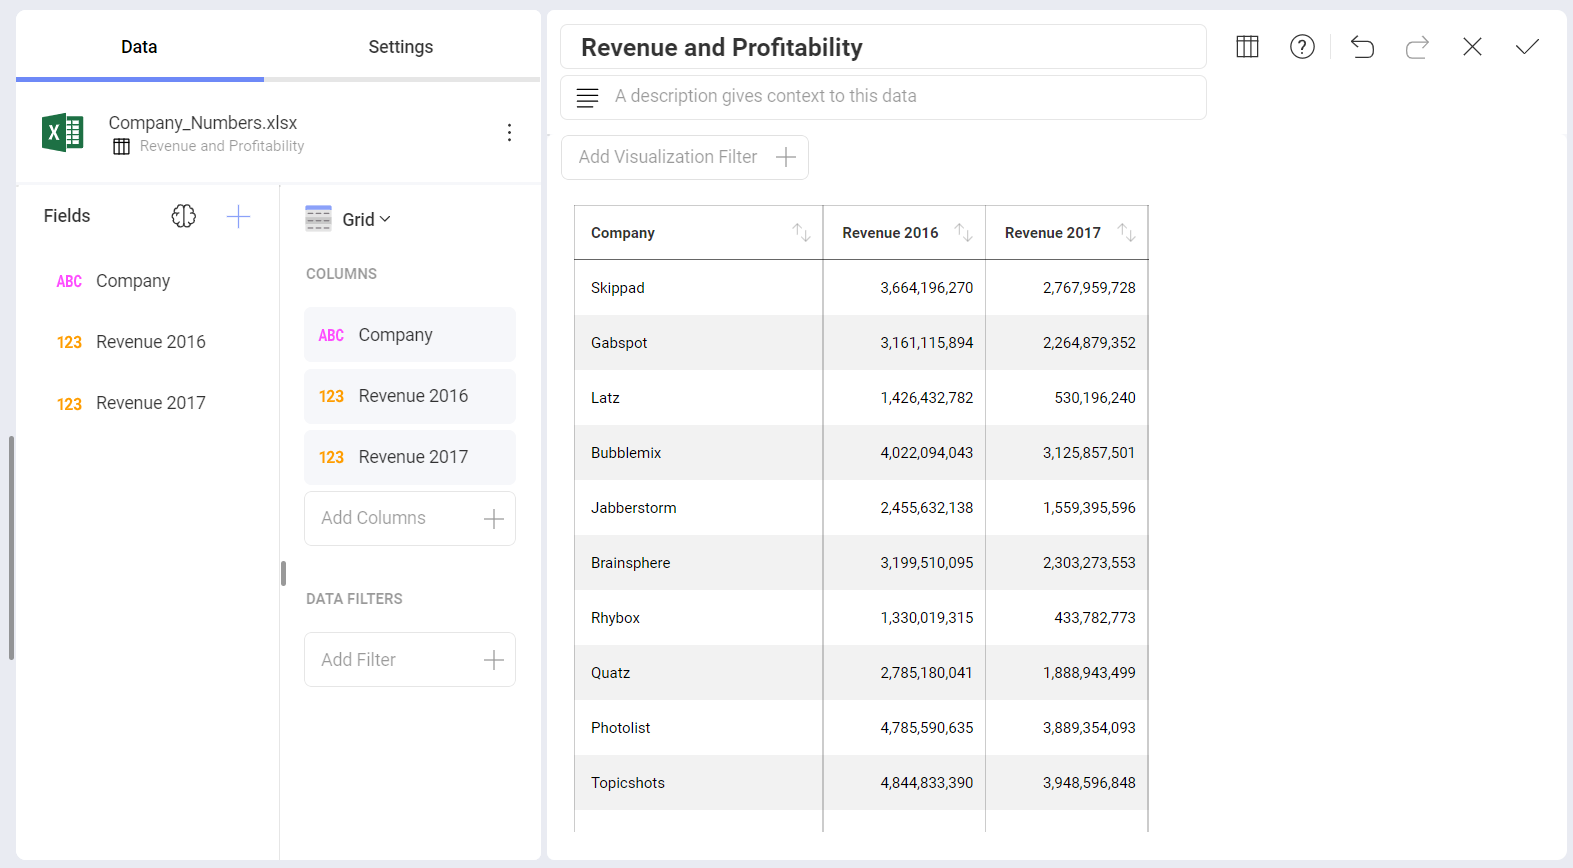 Dashboard showing a comparision between Revenue Figures for a 2-Year Period